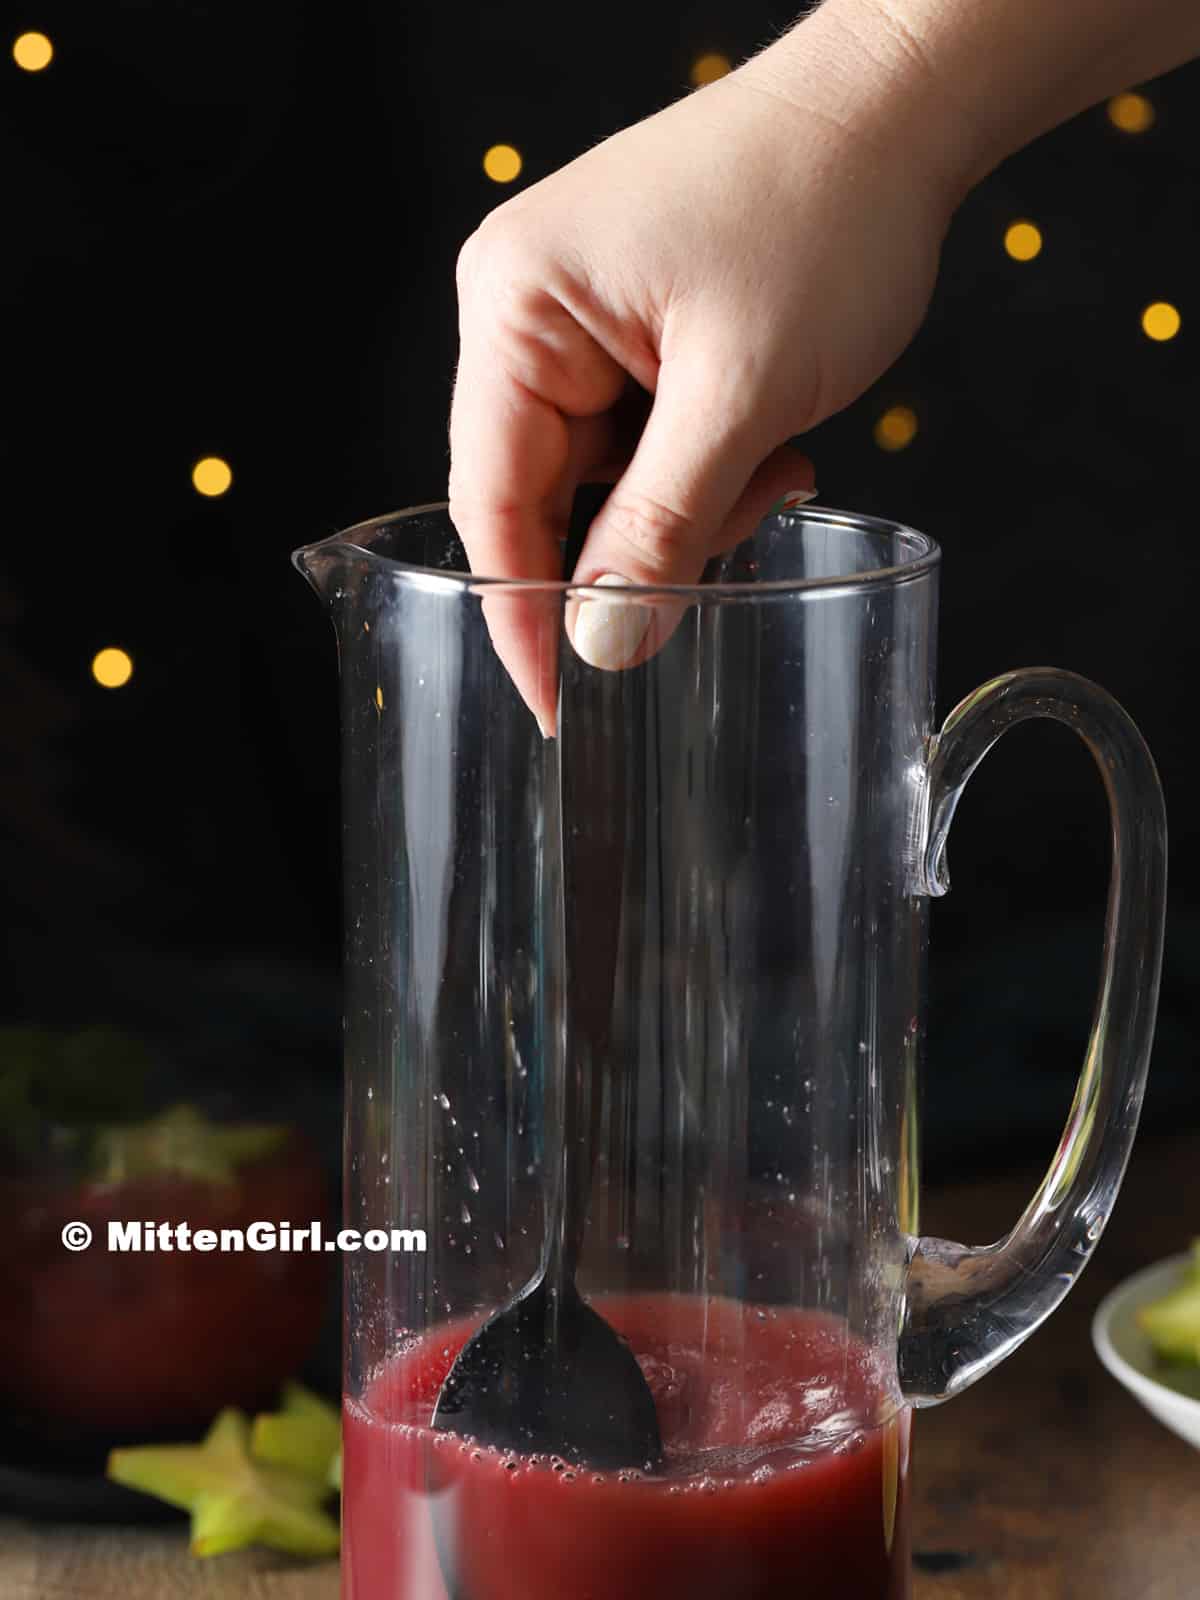 A hand stirring a pitcher of punch.